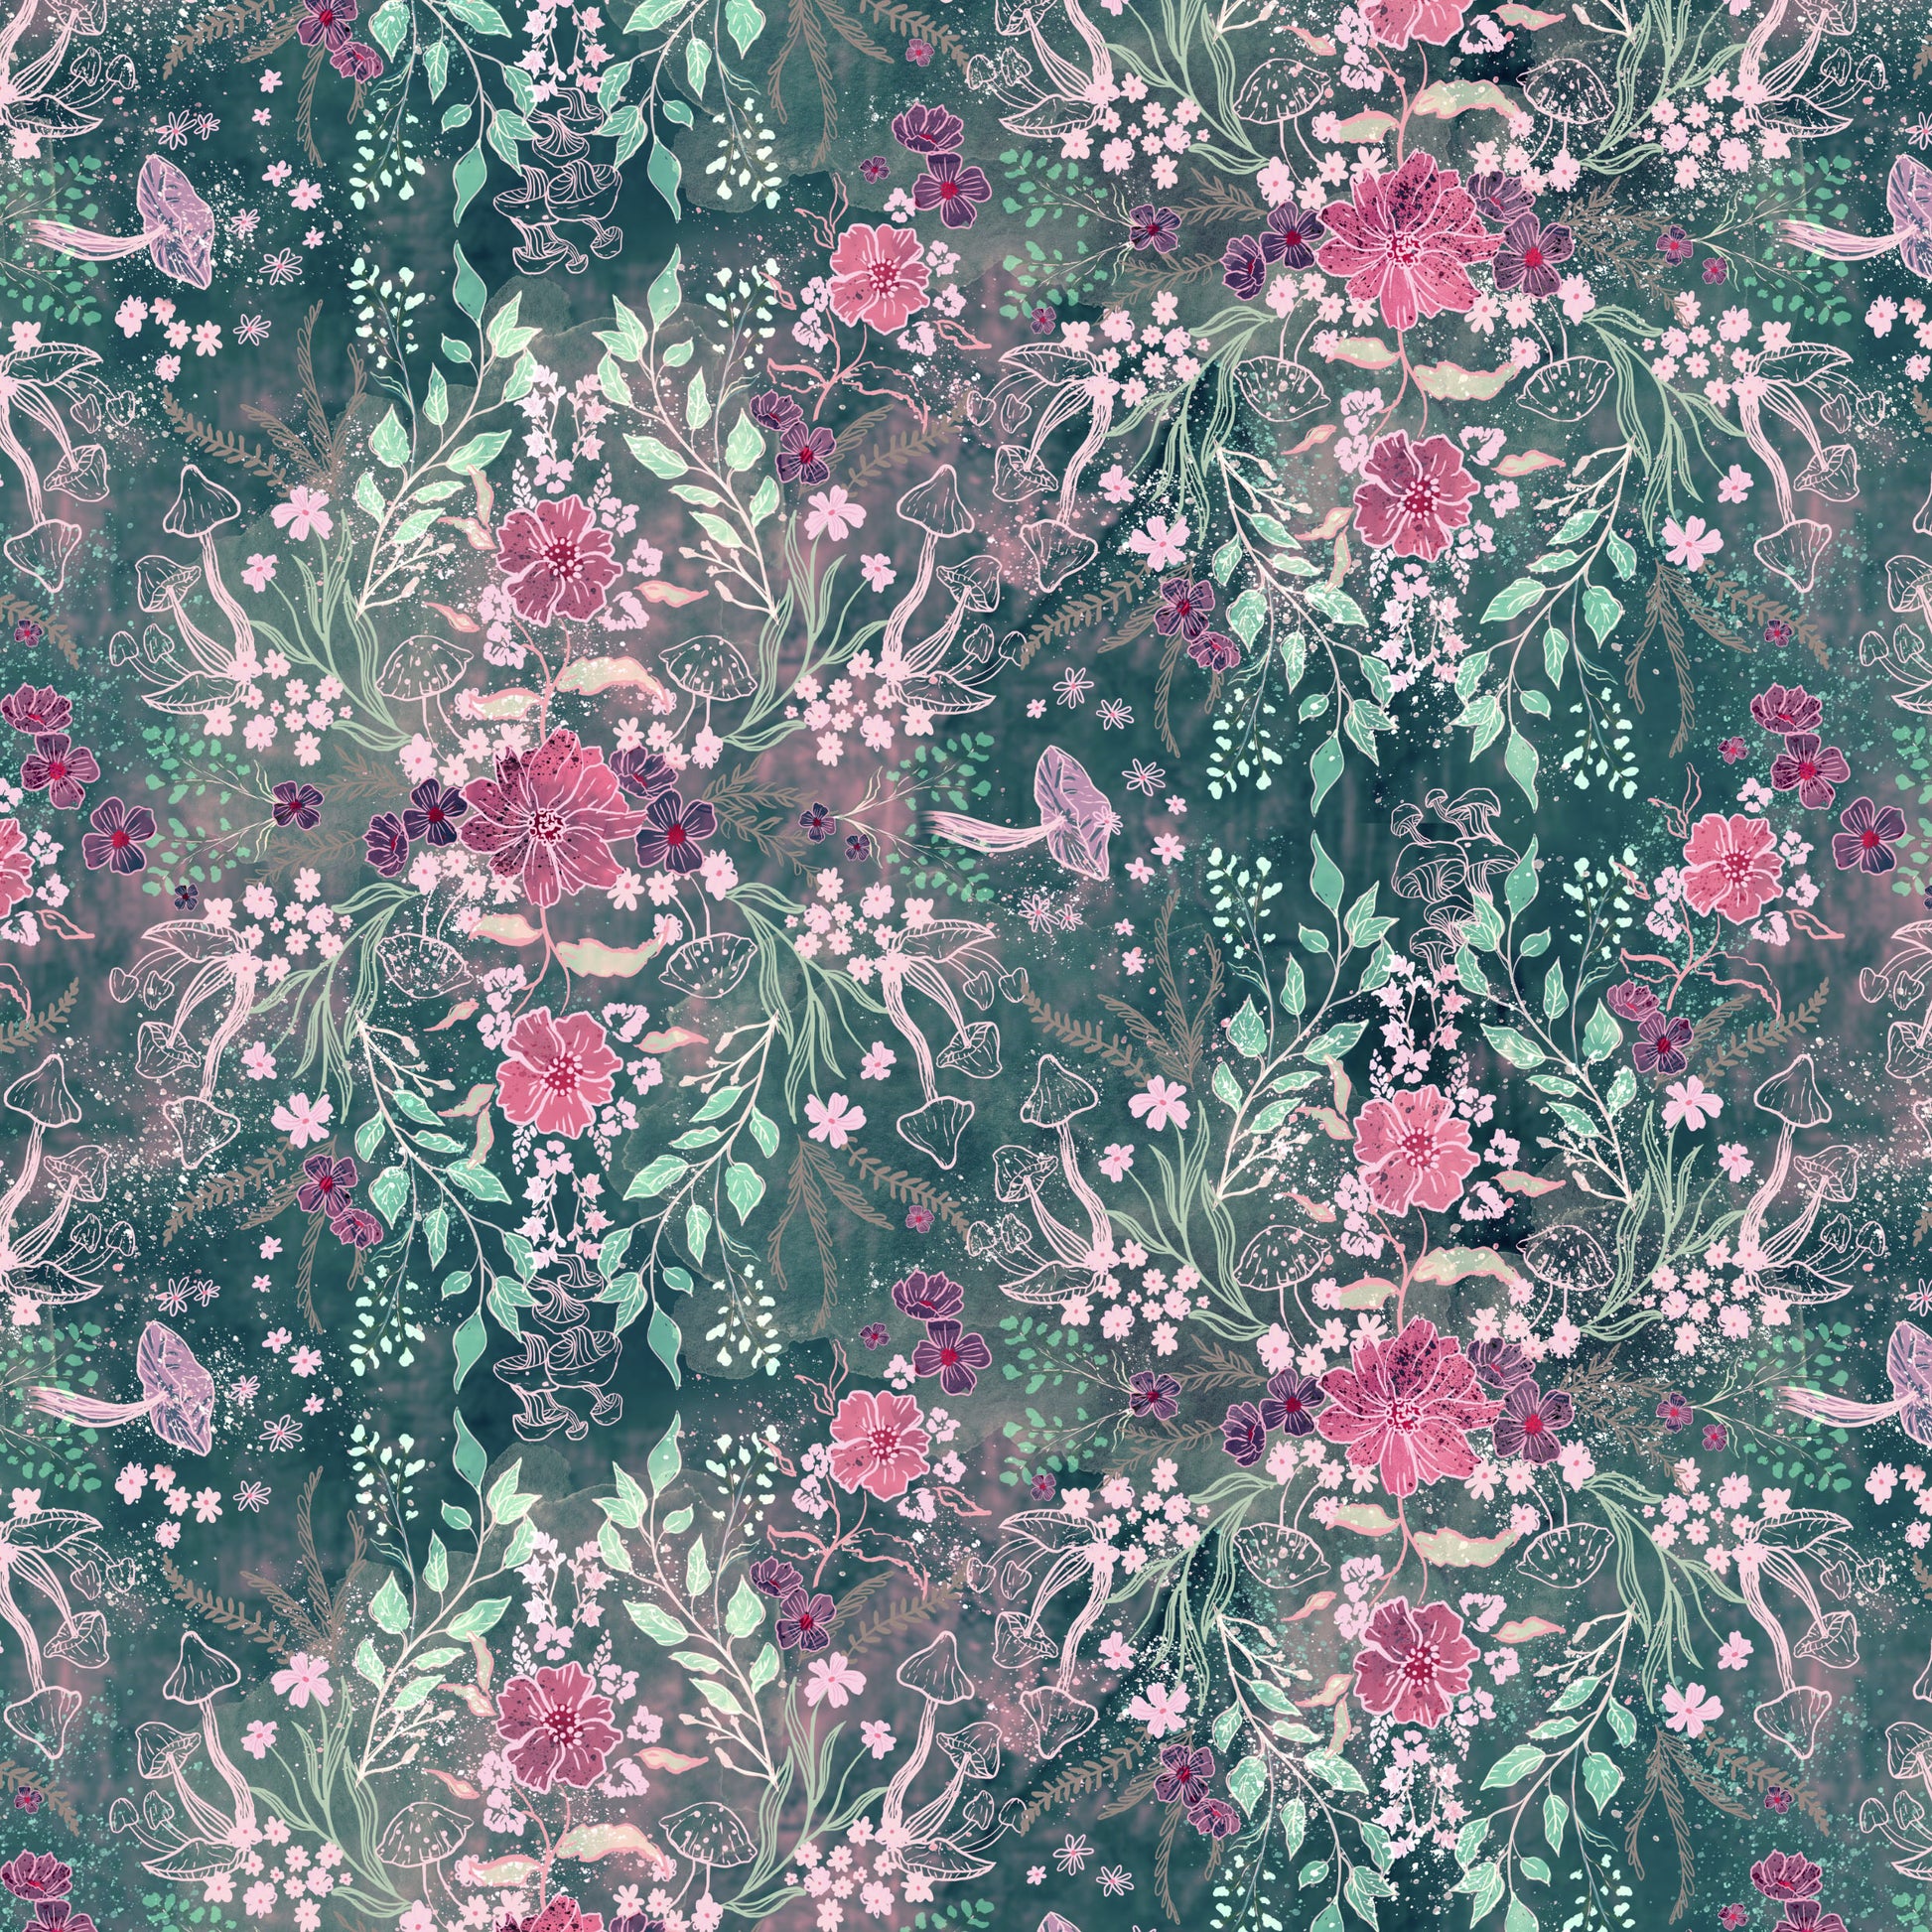 A modeled green background with mirror images of flowers, mushrooms and leaves in shades of purple, pink and green.